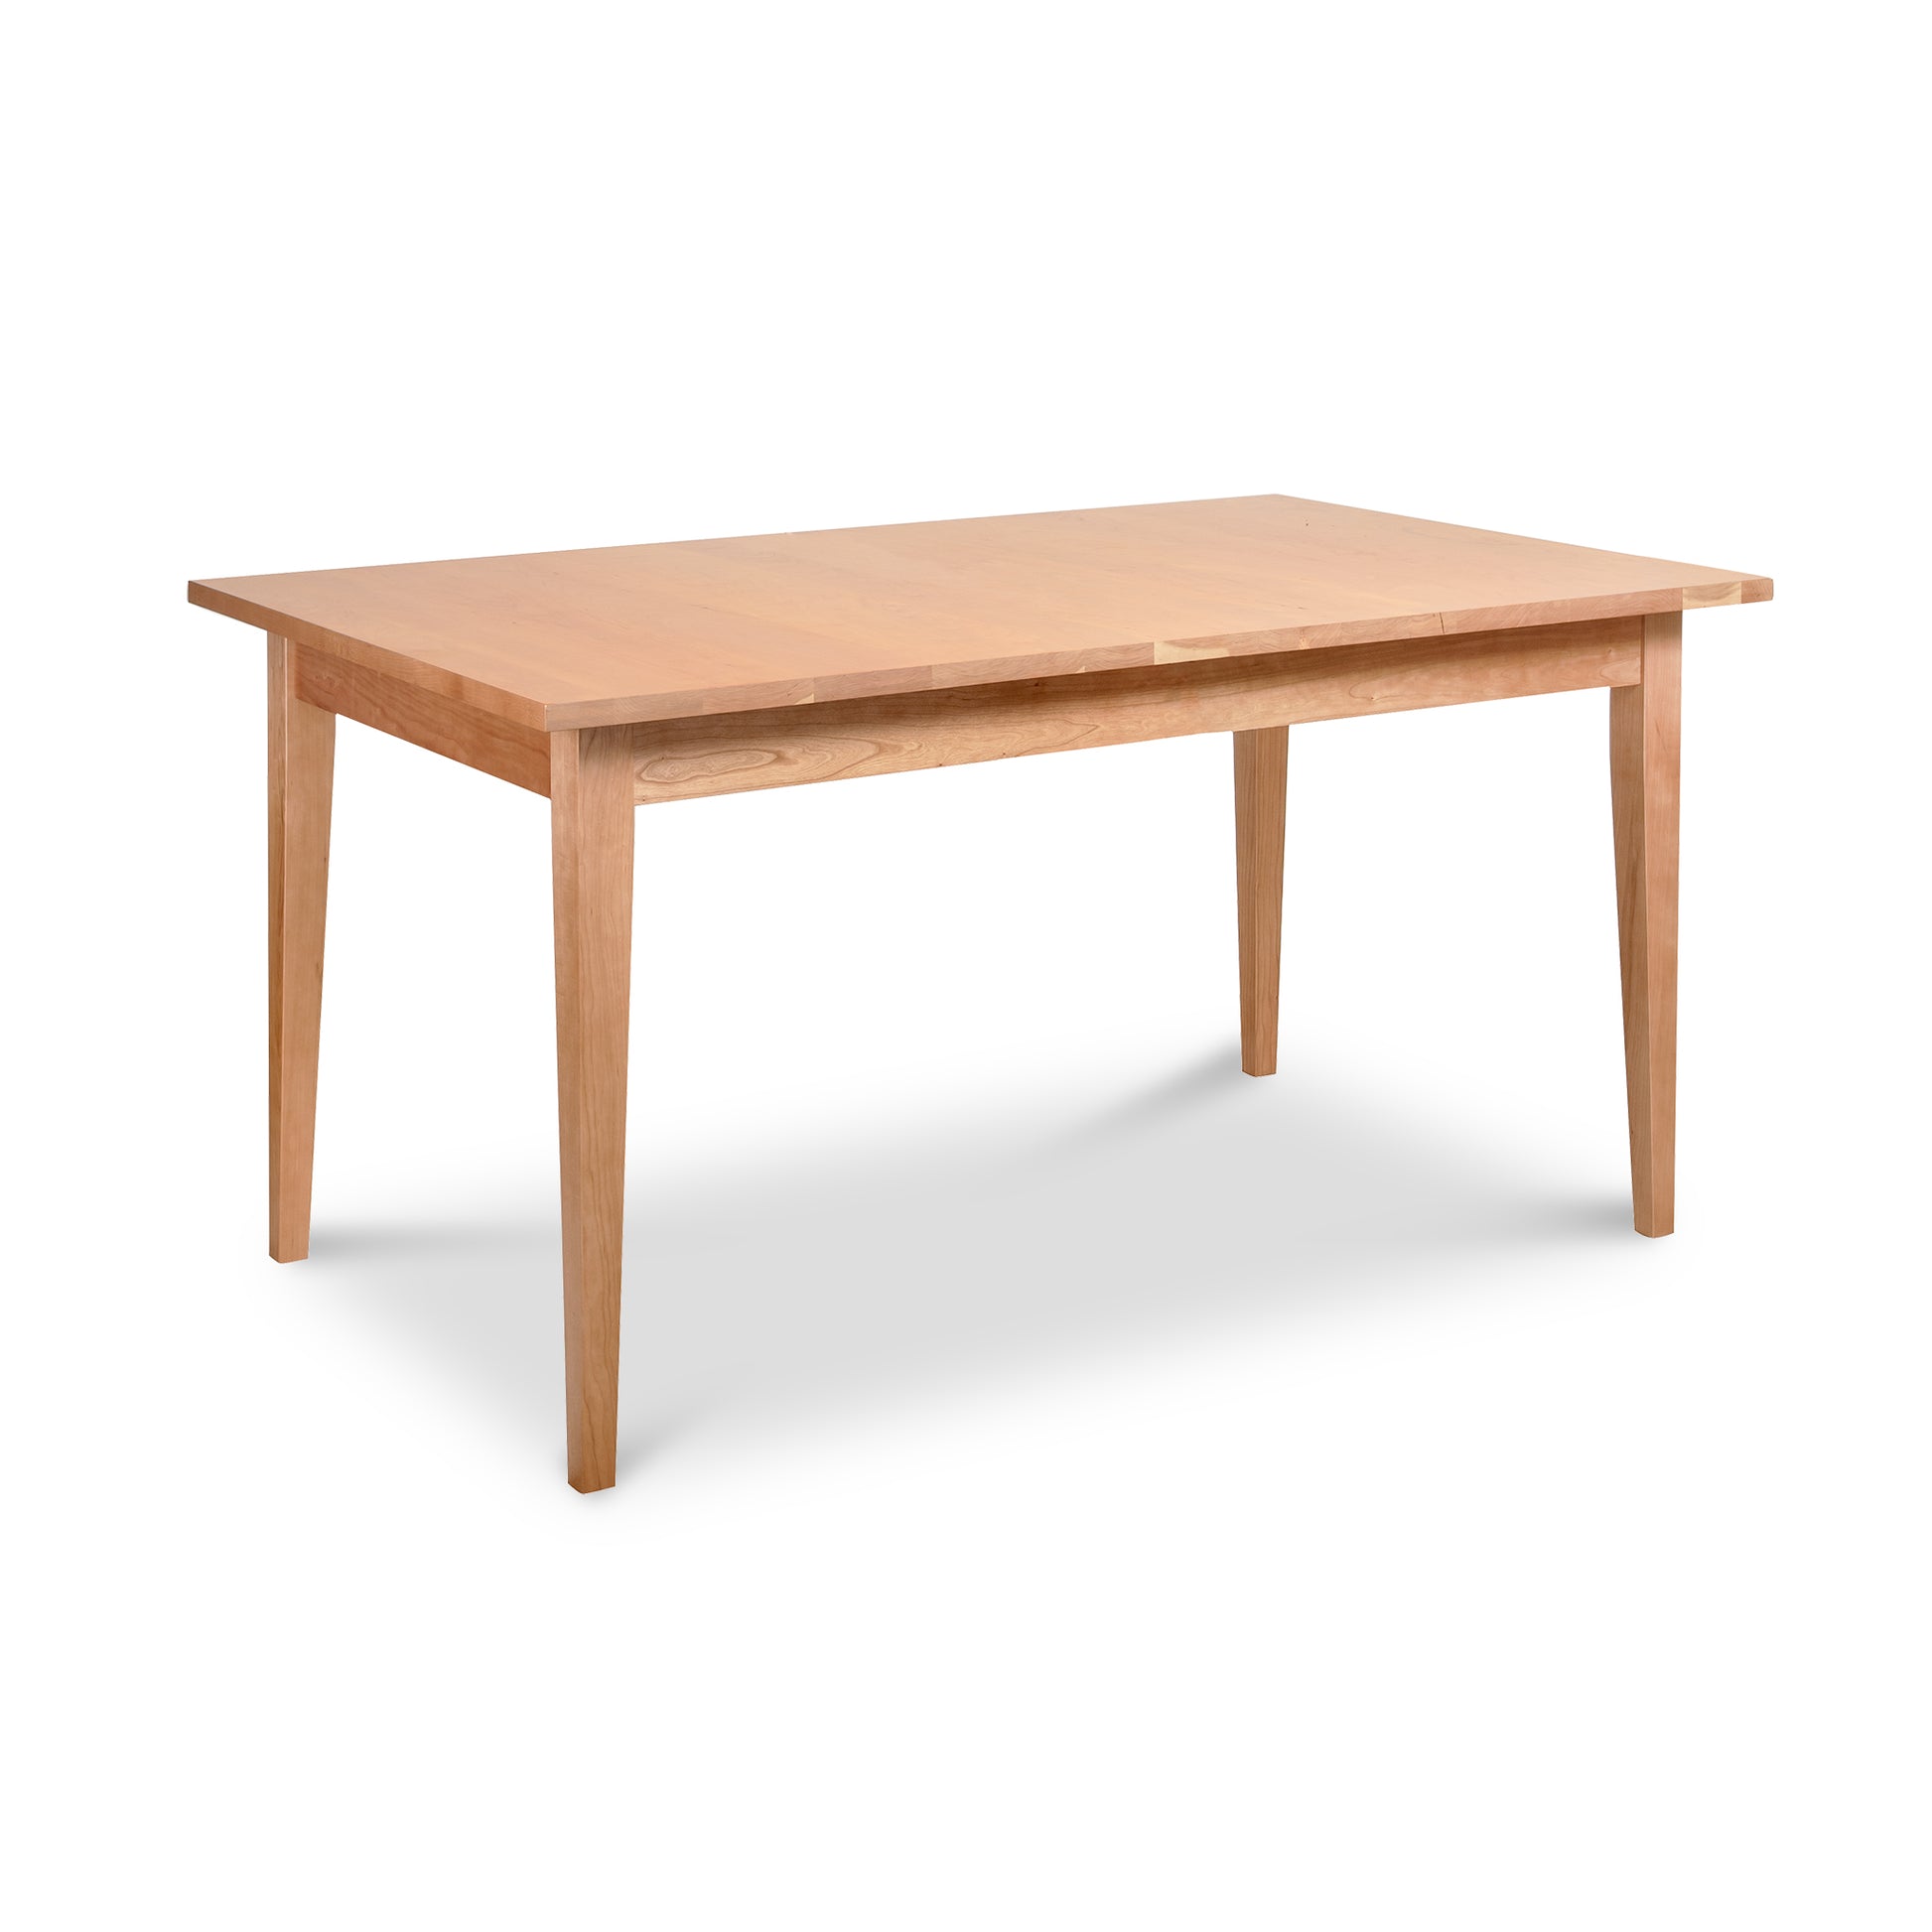 A Classic Shaker Solid Top Dining Table by Lyndon Furniture on a white background.